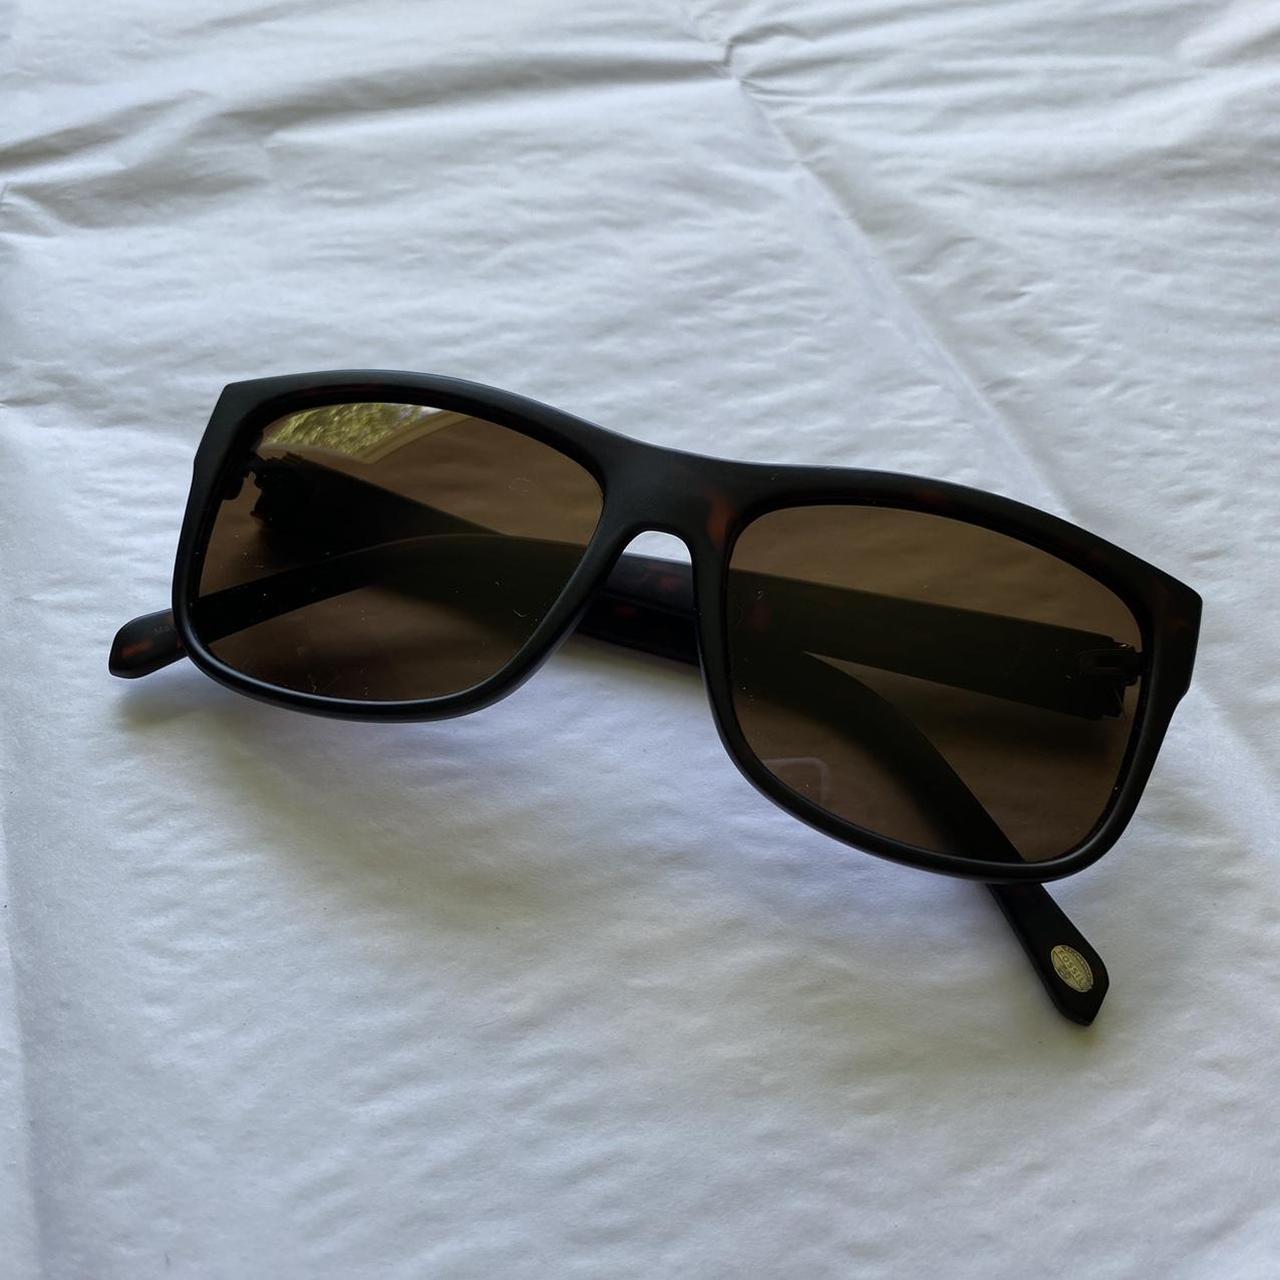 Fossil Men's Black and Brown Sunglasses